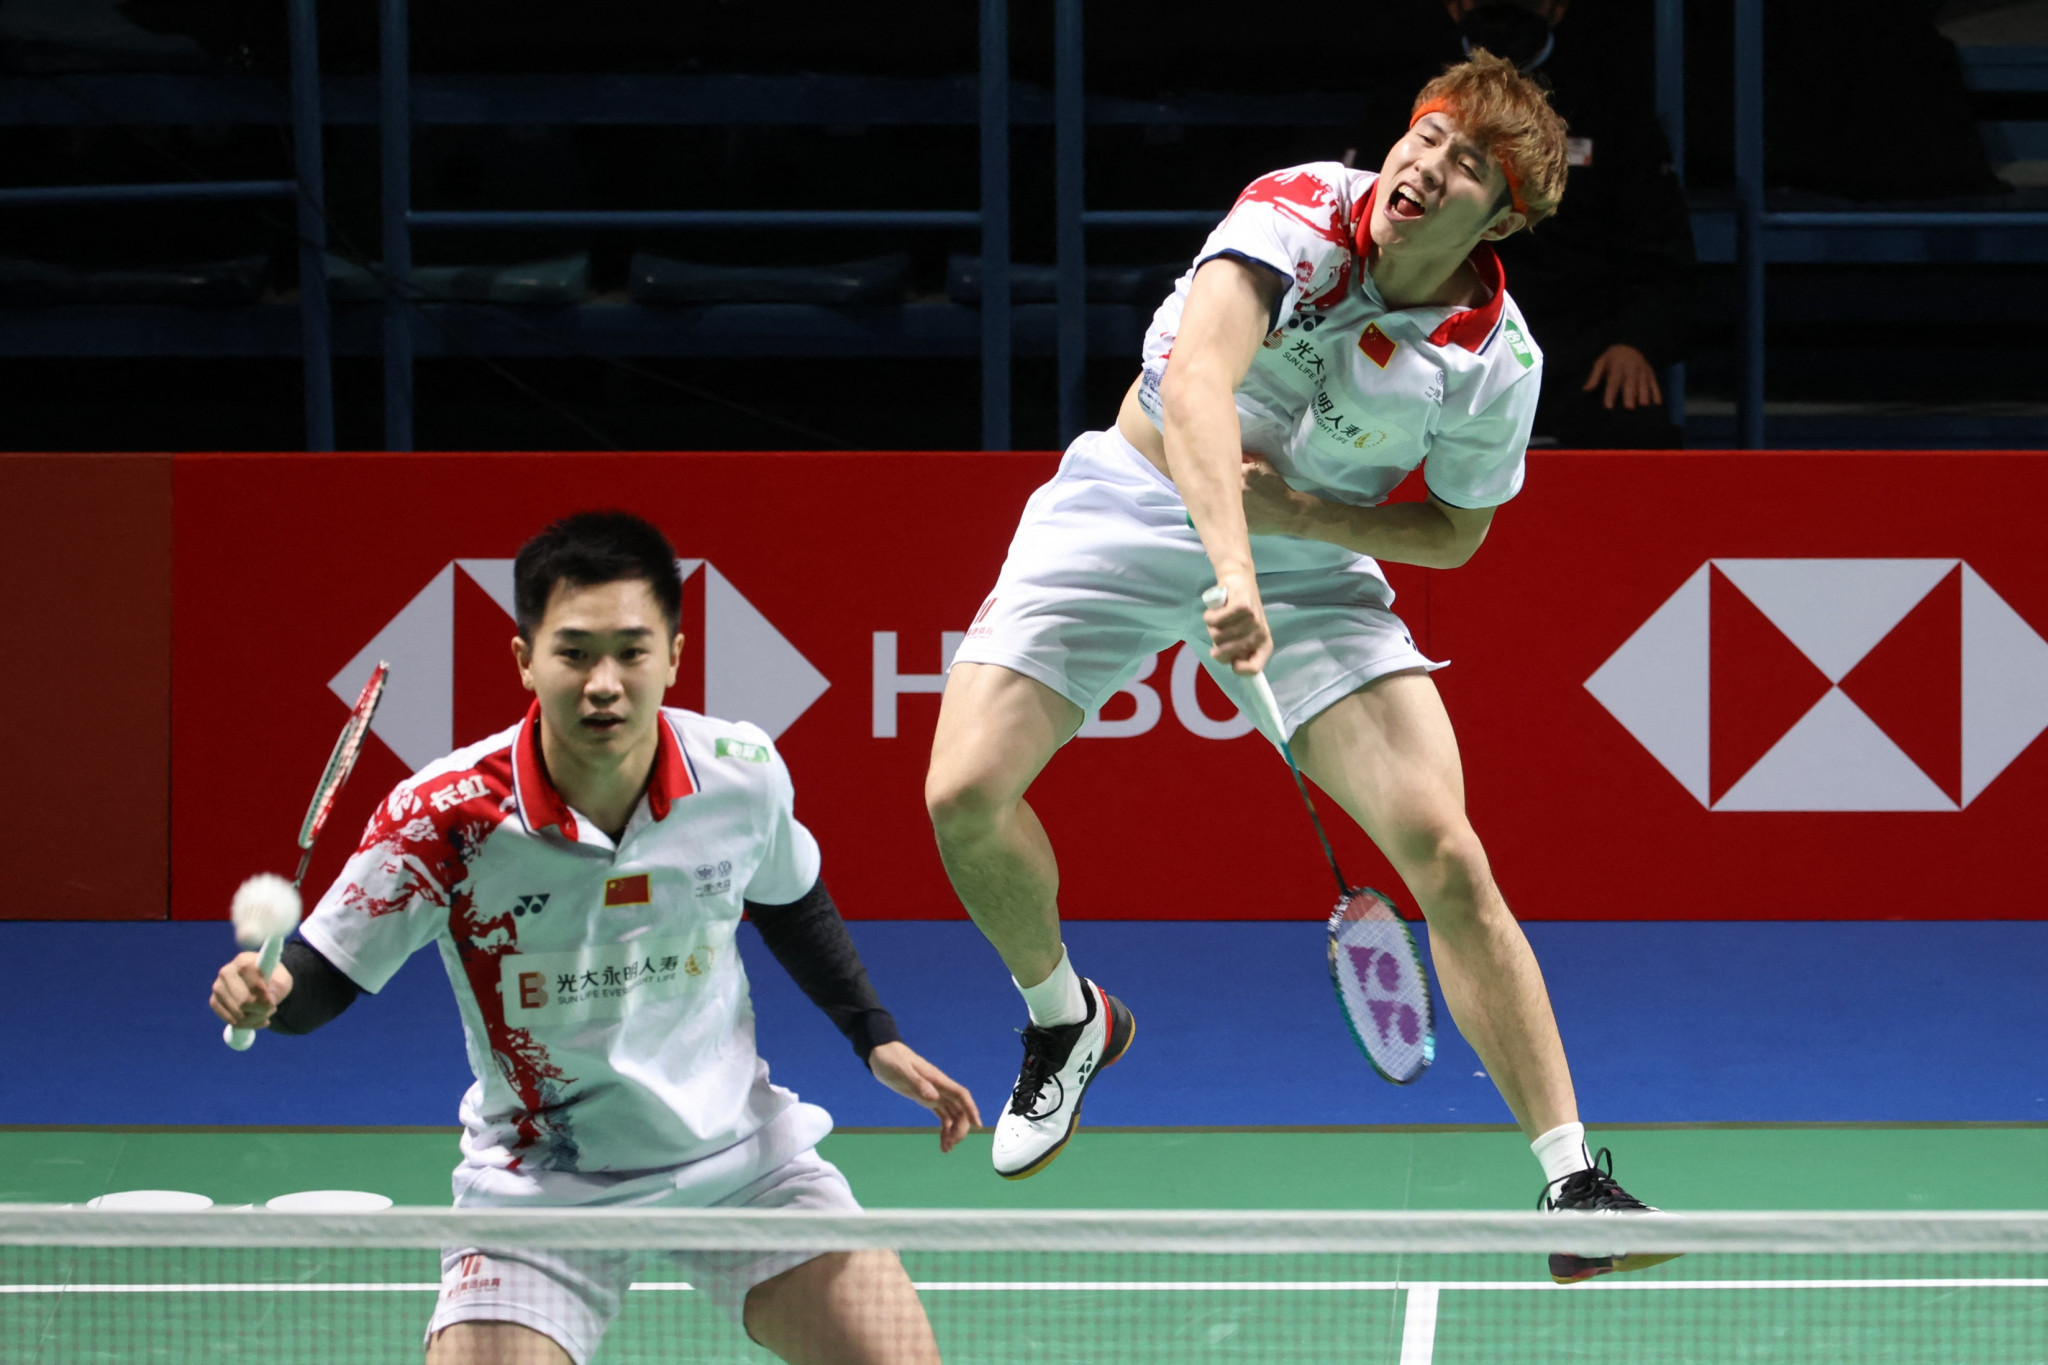 World number 17 He Jiting, right, and Tan Qiang have received suspended three-month bans for 